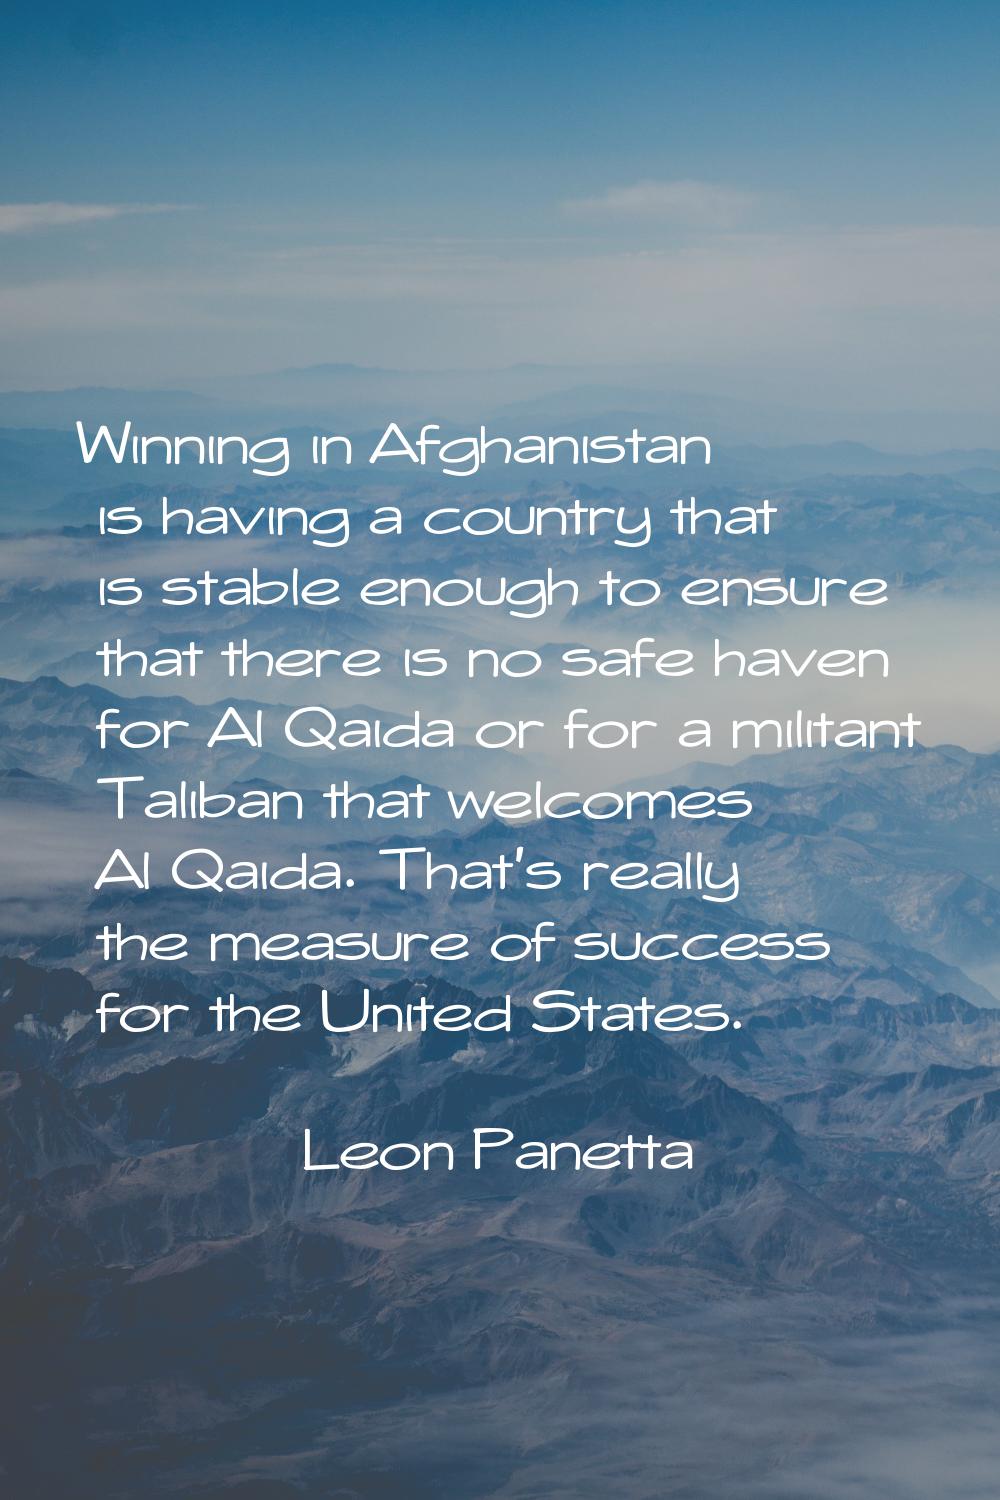 Winning in Afghanistan is having a country that is stable enough to ensure that there is no safe ha